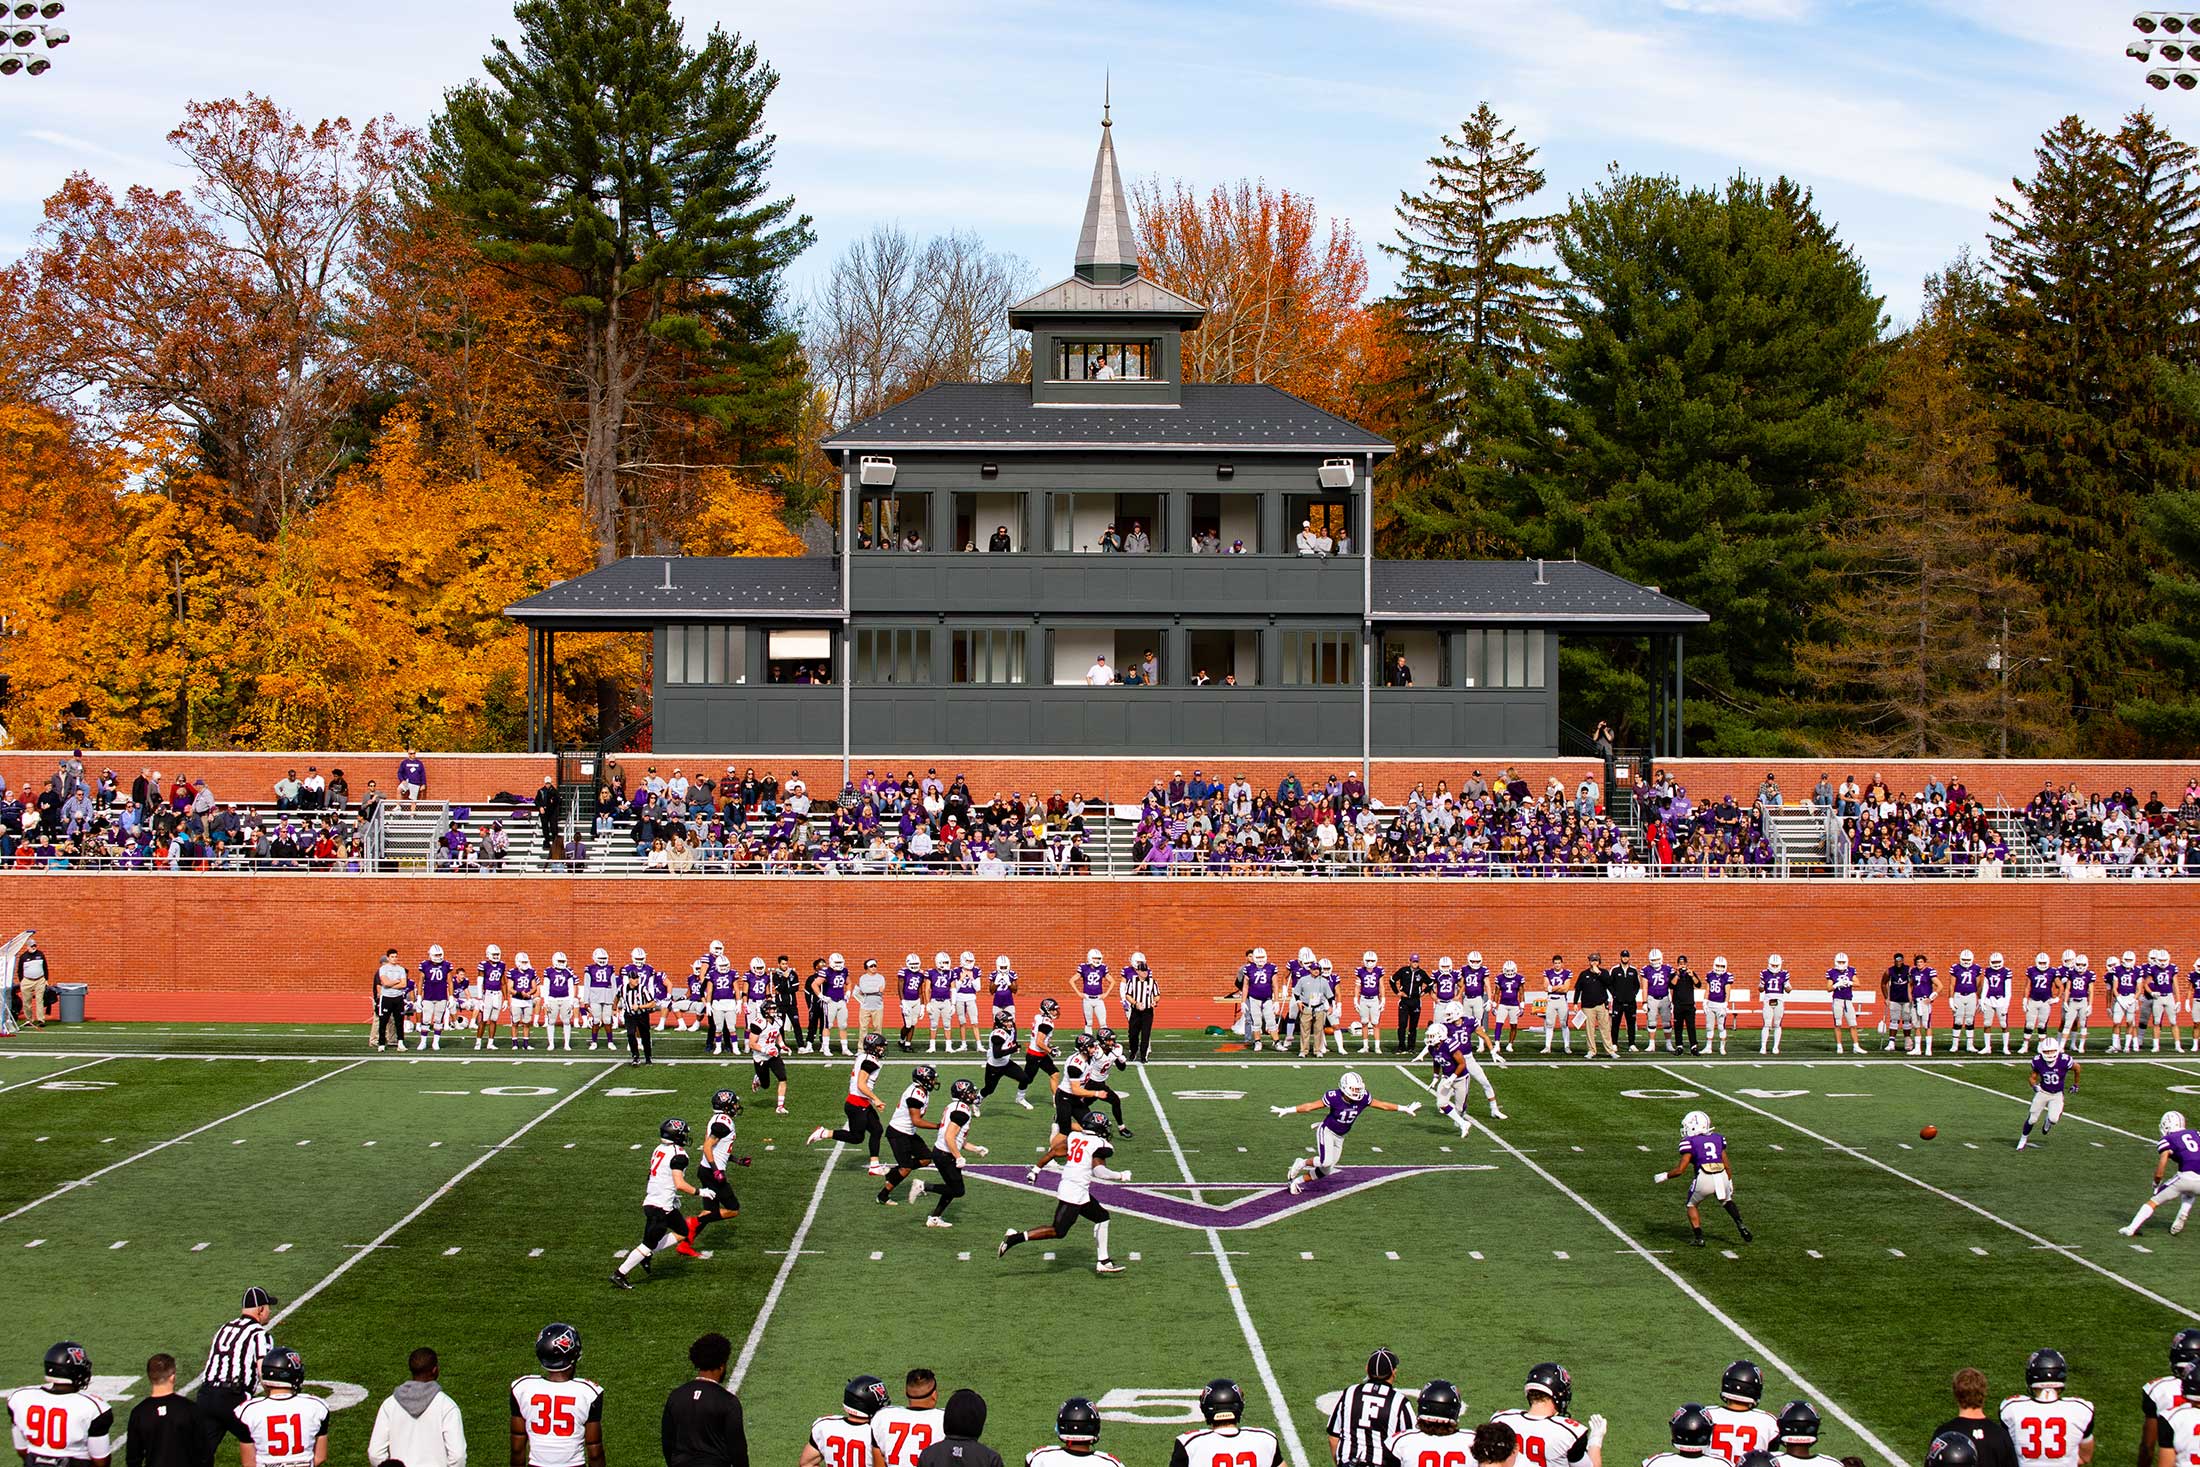 Amherst College's football team in action